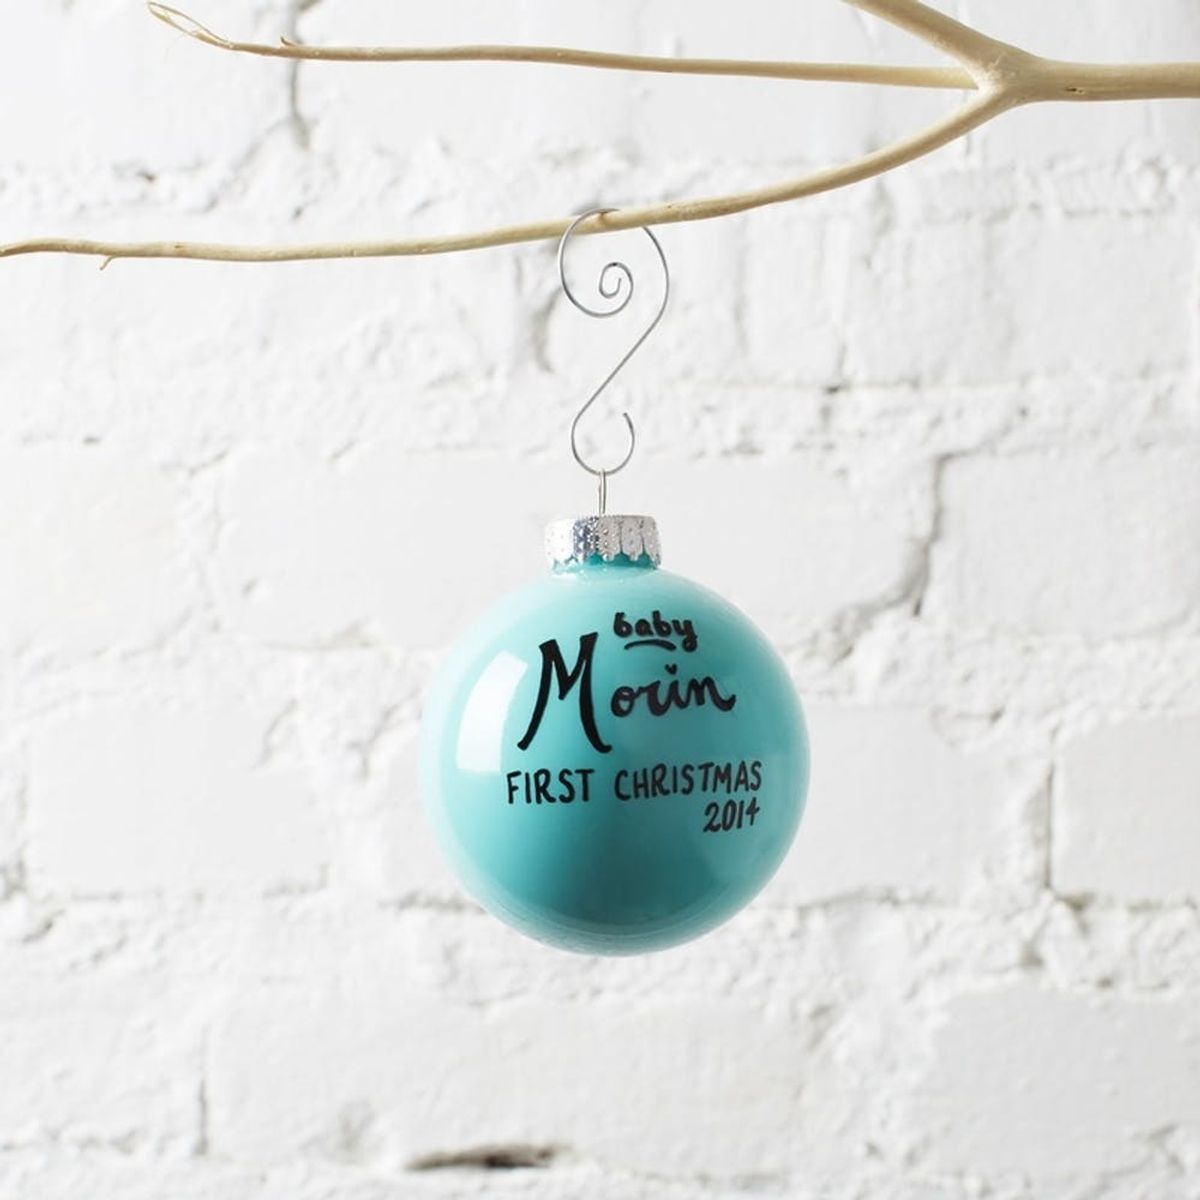 14 Customizable Ornaments for Your Baby’s First Christmas